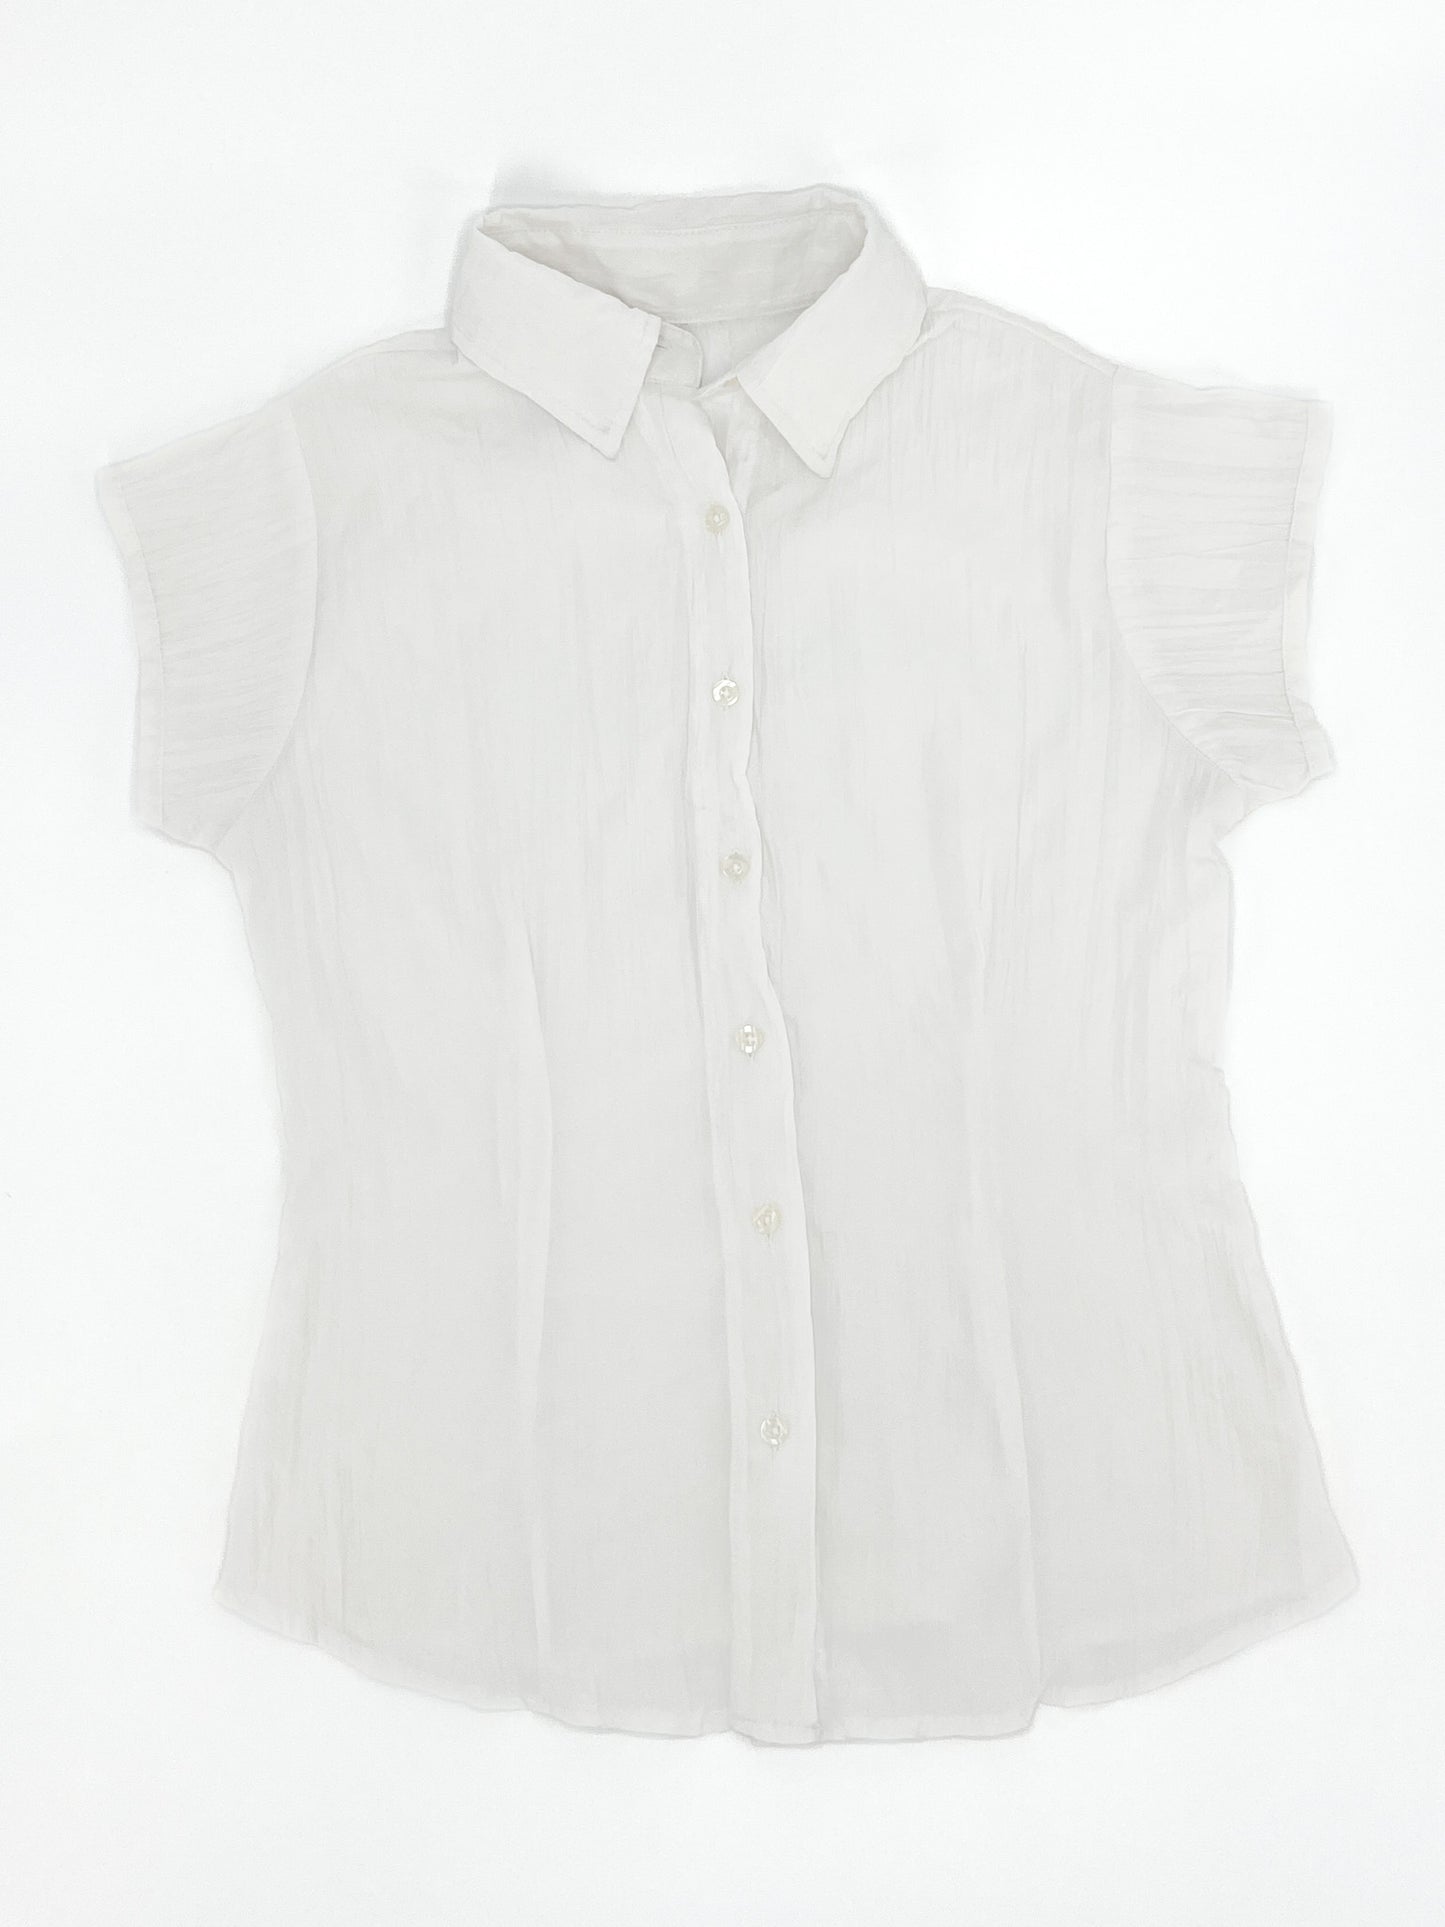 Vintage 00's White Button Up Top S